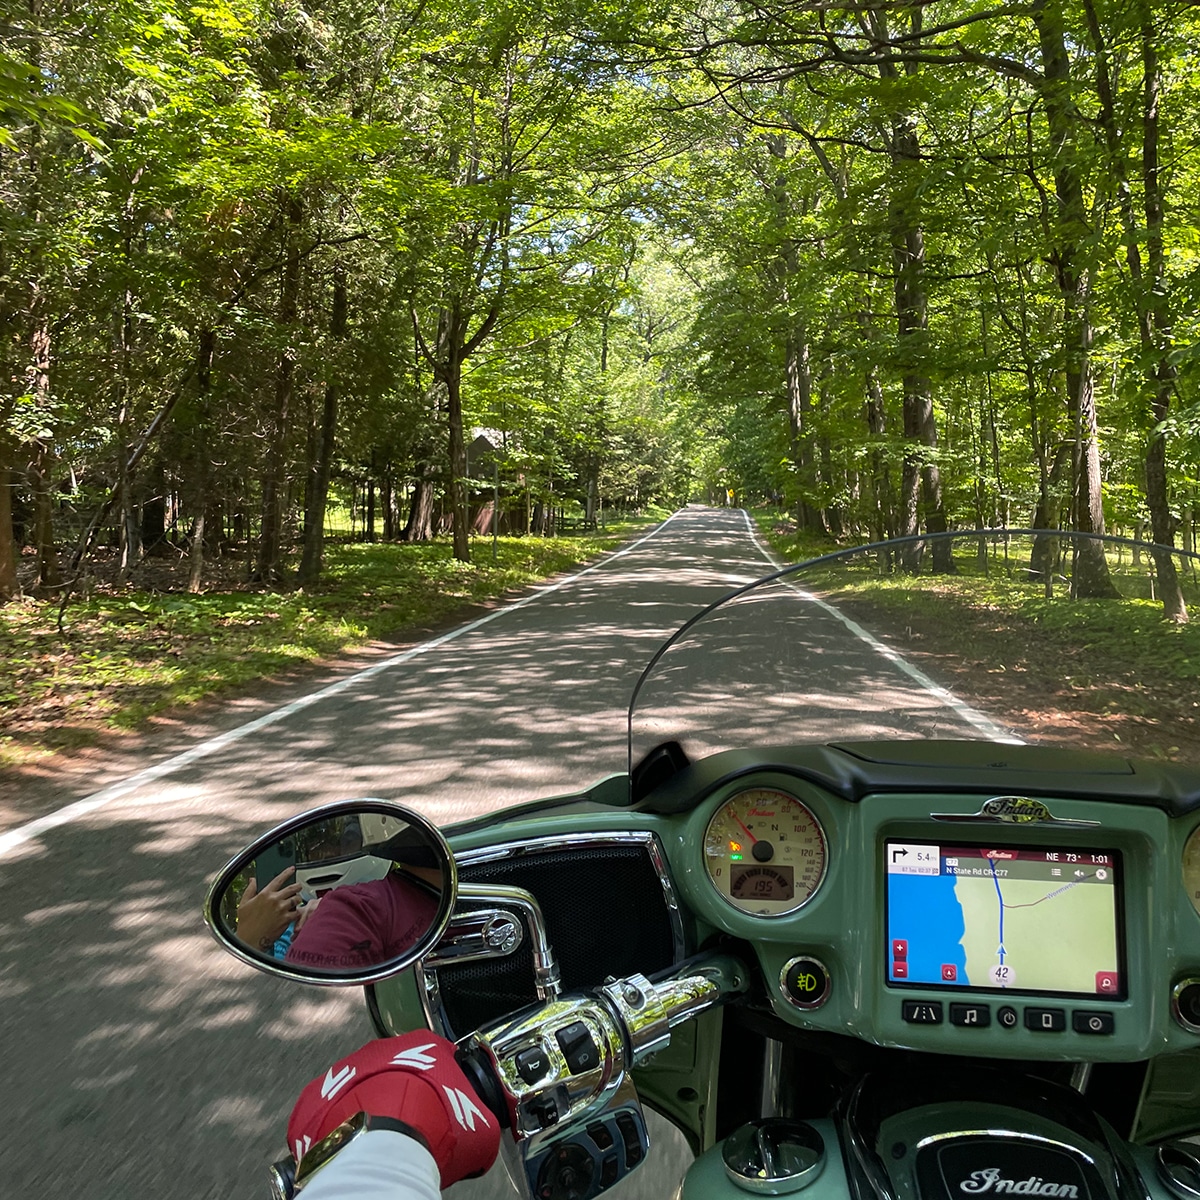 A photo taken from the back of our motorcycle as we rode through Michigan's Tunnel of Trees.